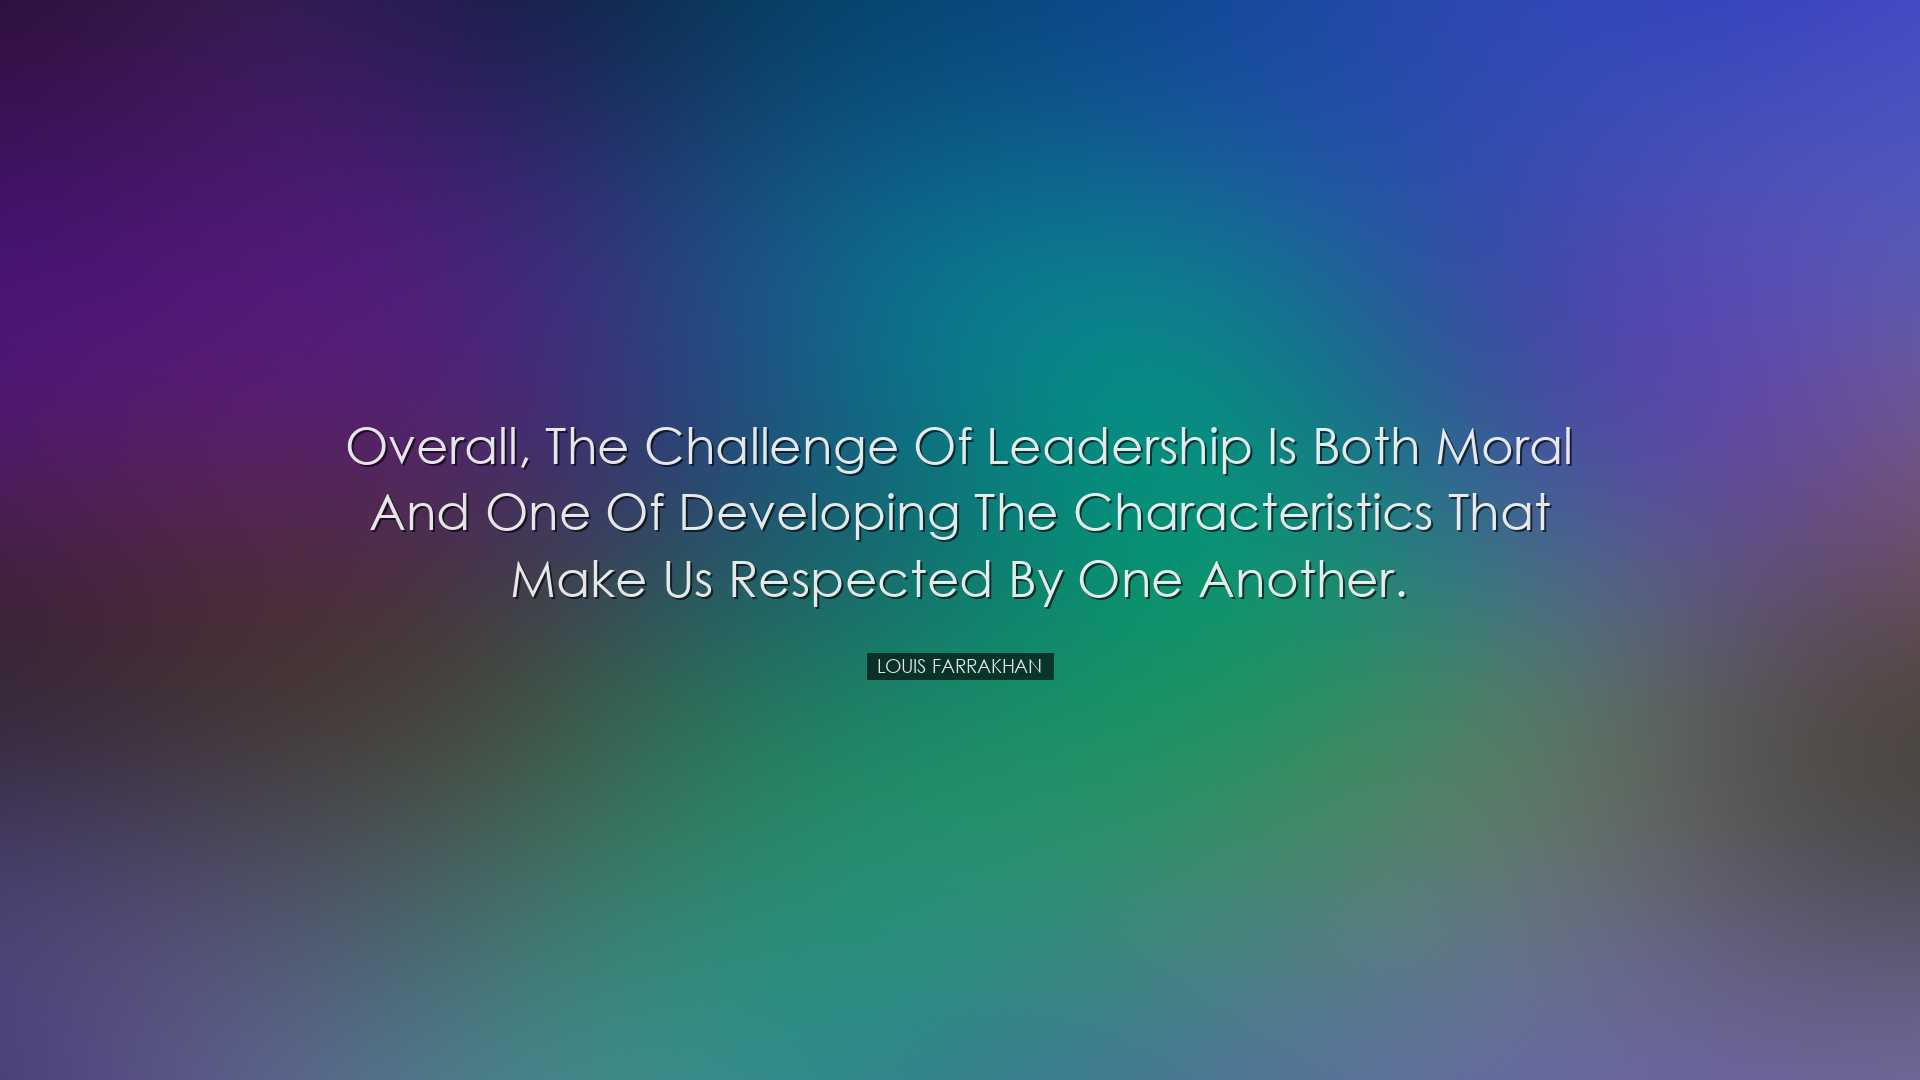 Overall, the challenge of leadership is both moral and one of deve